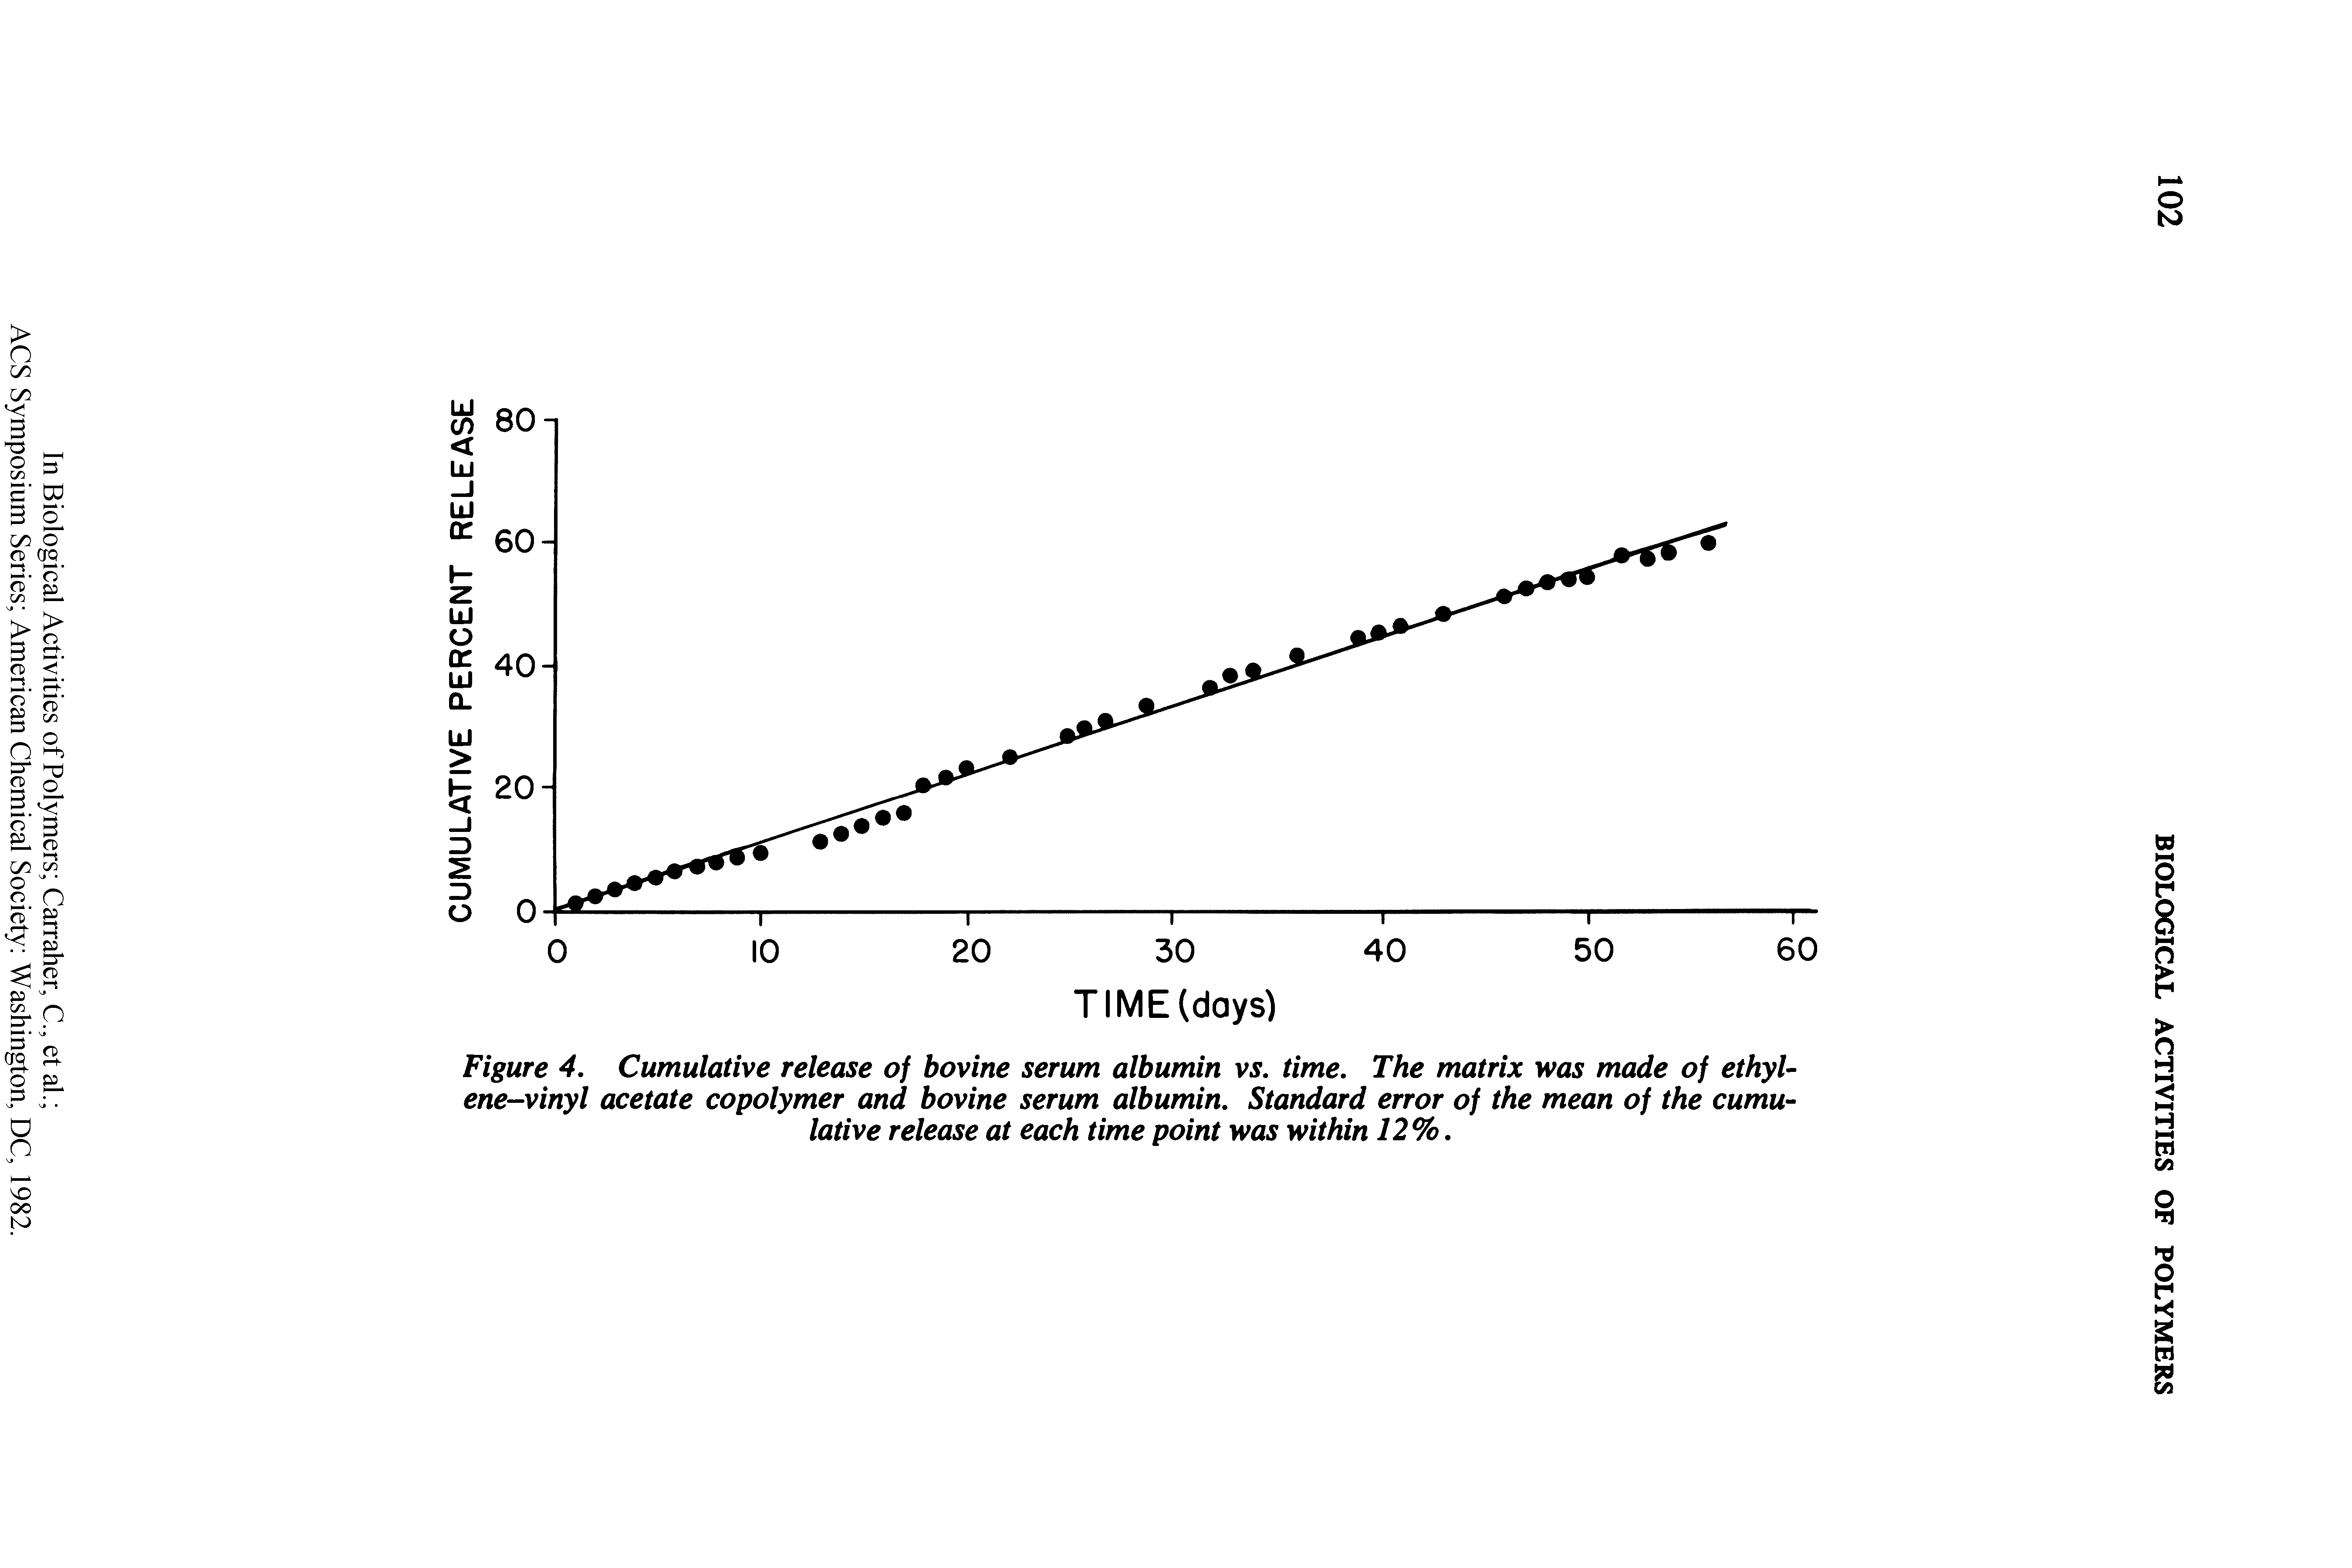 Figure 4. Cumulative release of bovine serum albumin vs. time. The matrix was made of ethylene-vinyl acetate copolymer and bovine serum albumin. Standard error of the mean of the cumulative release at each time point was within 12%.